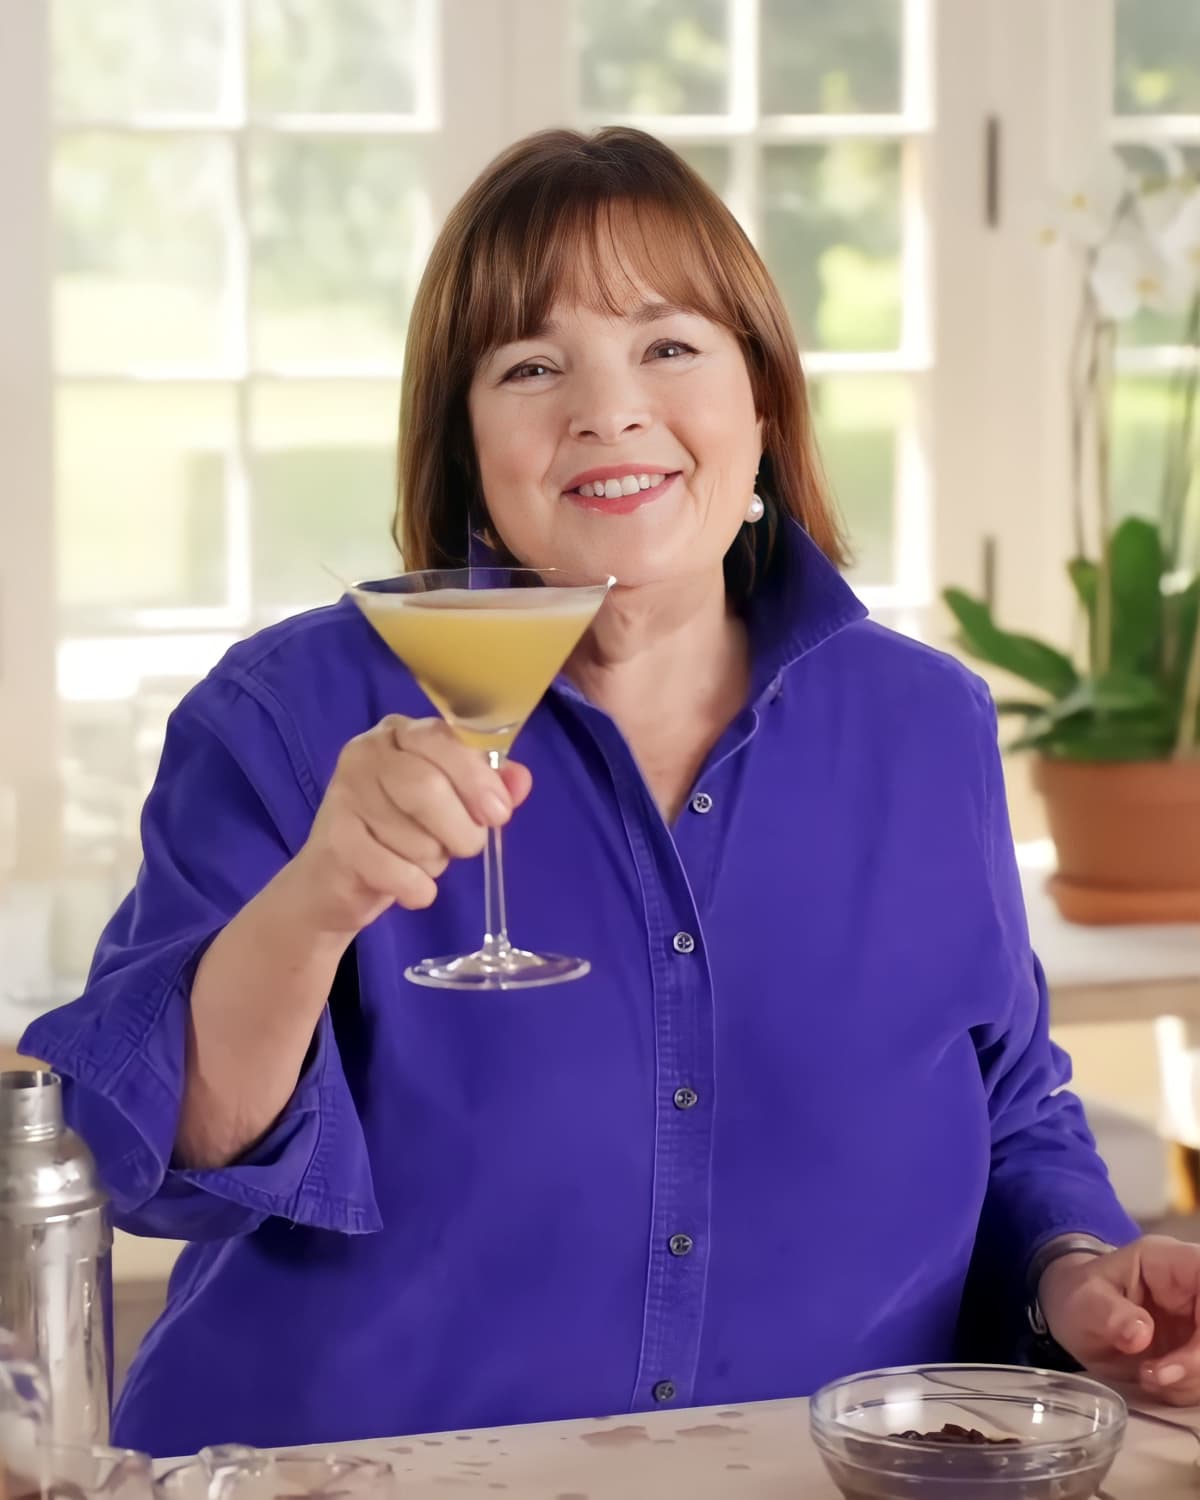 Ina Garten smiling and holding a glass of cocktail